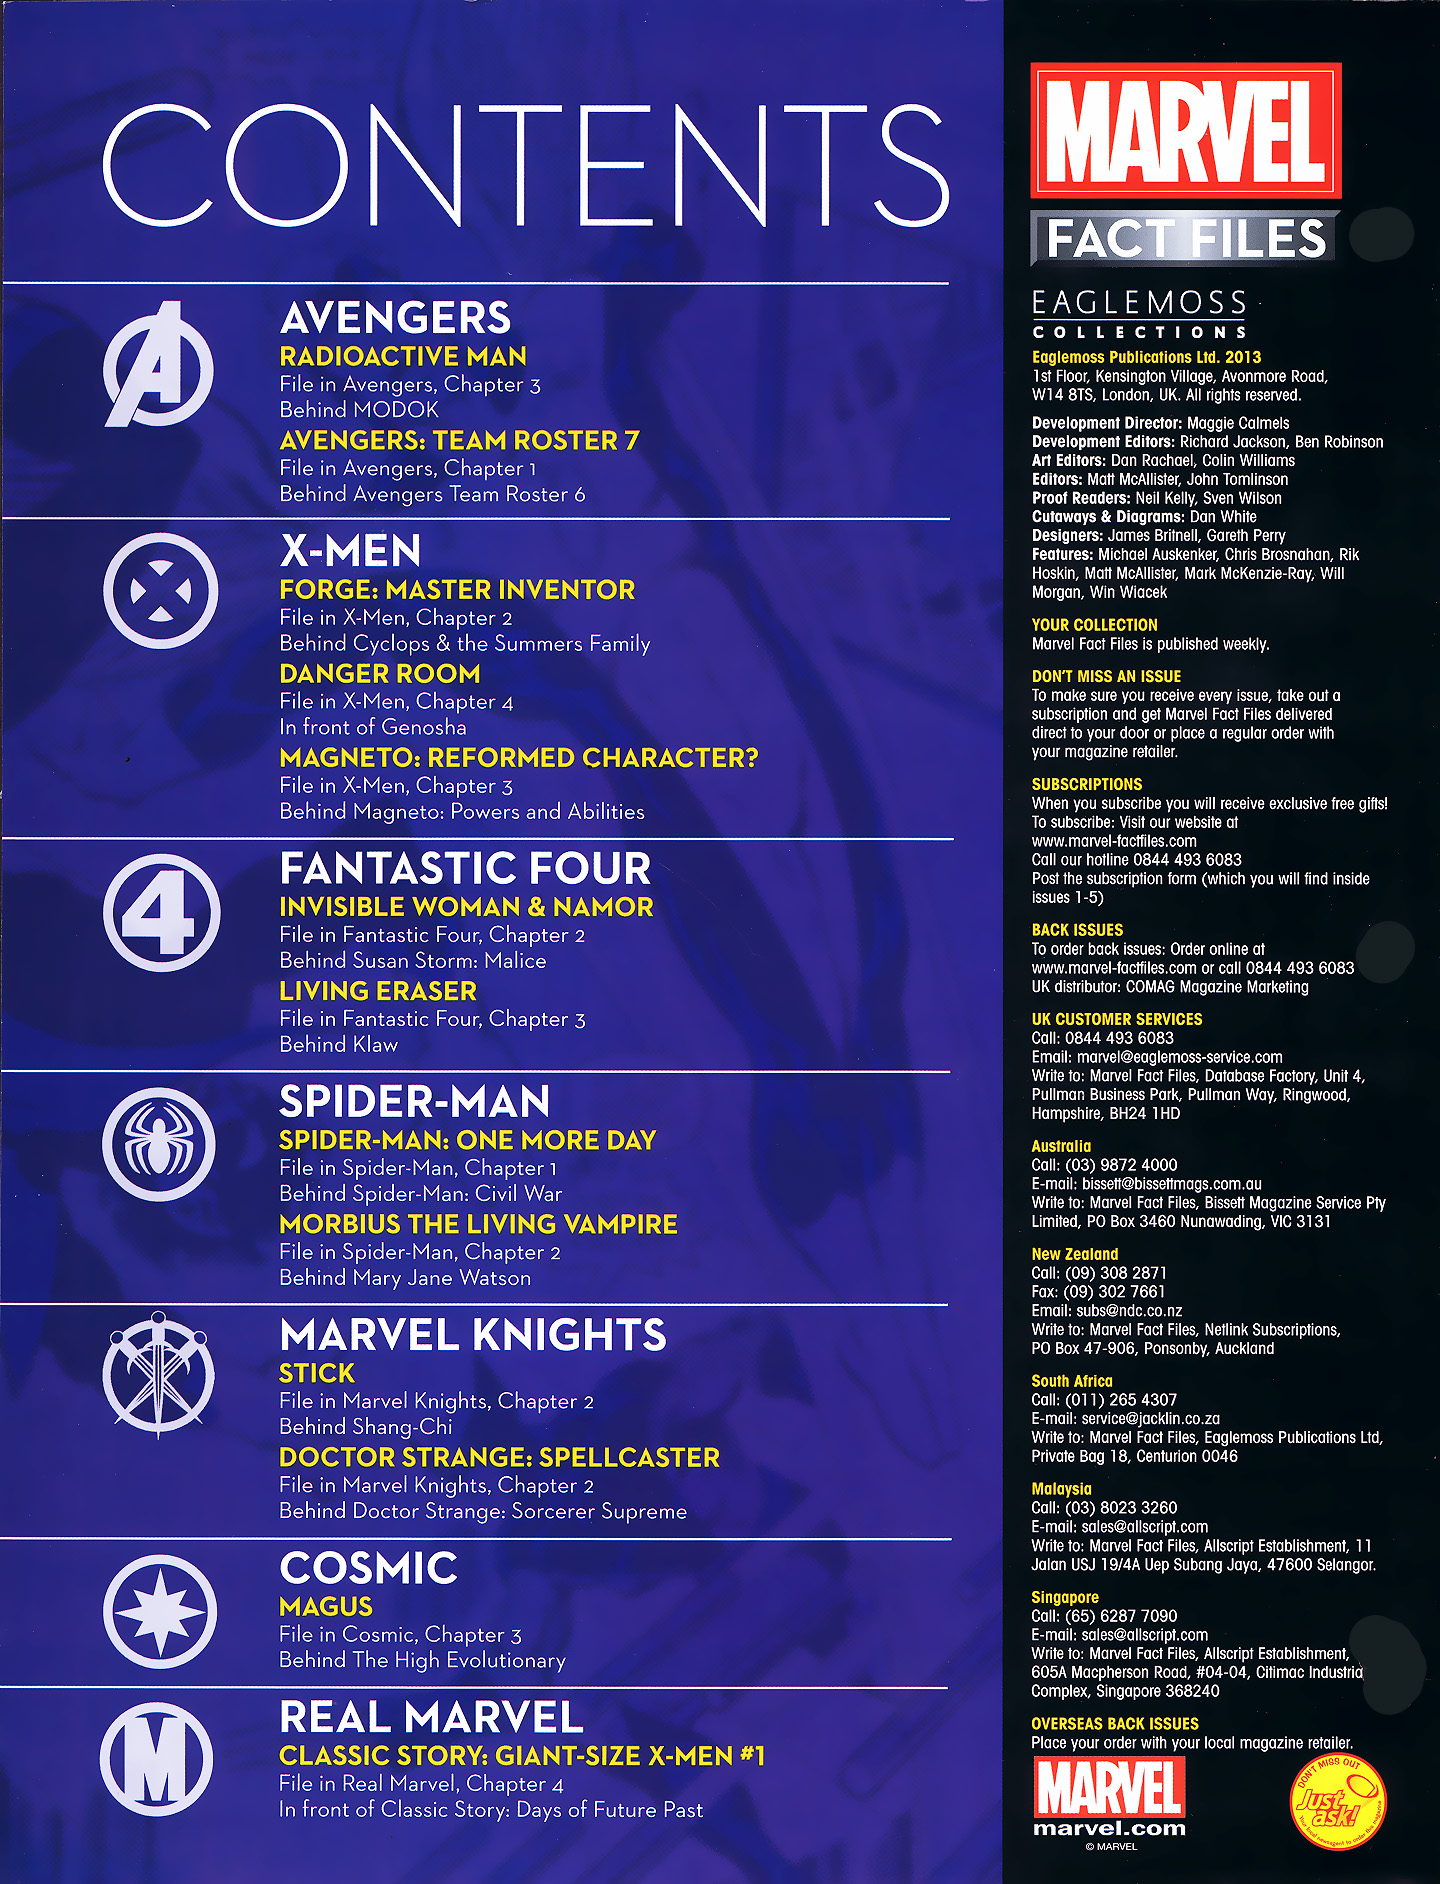 Read online Marvel Fact Files comic -  Issue #34 - 3